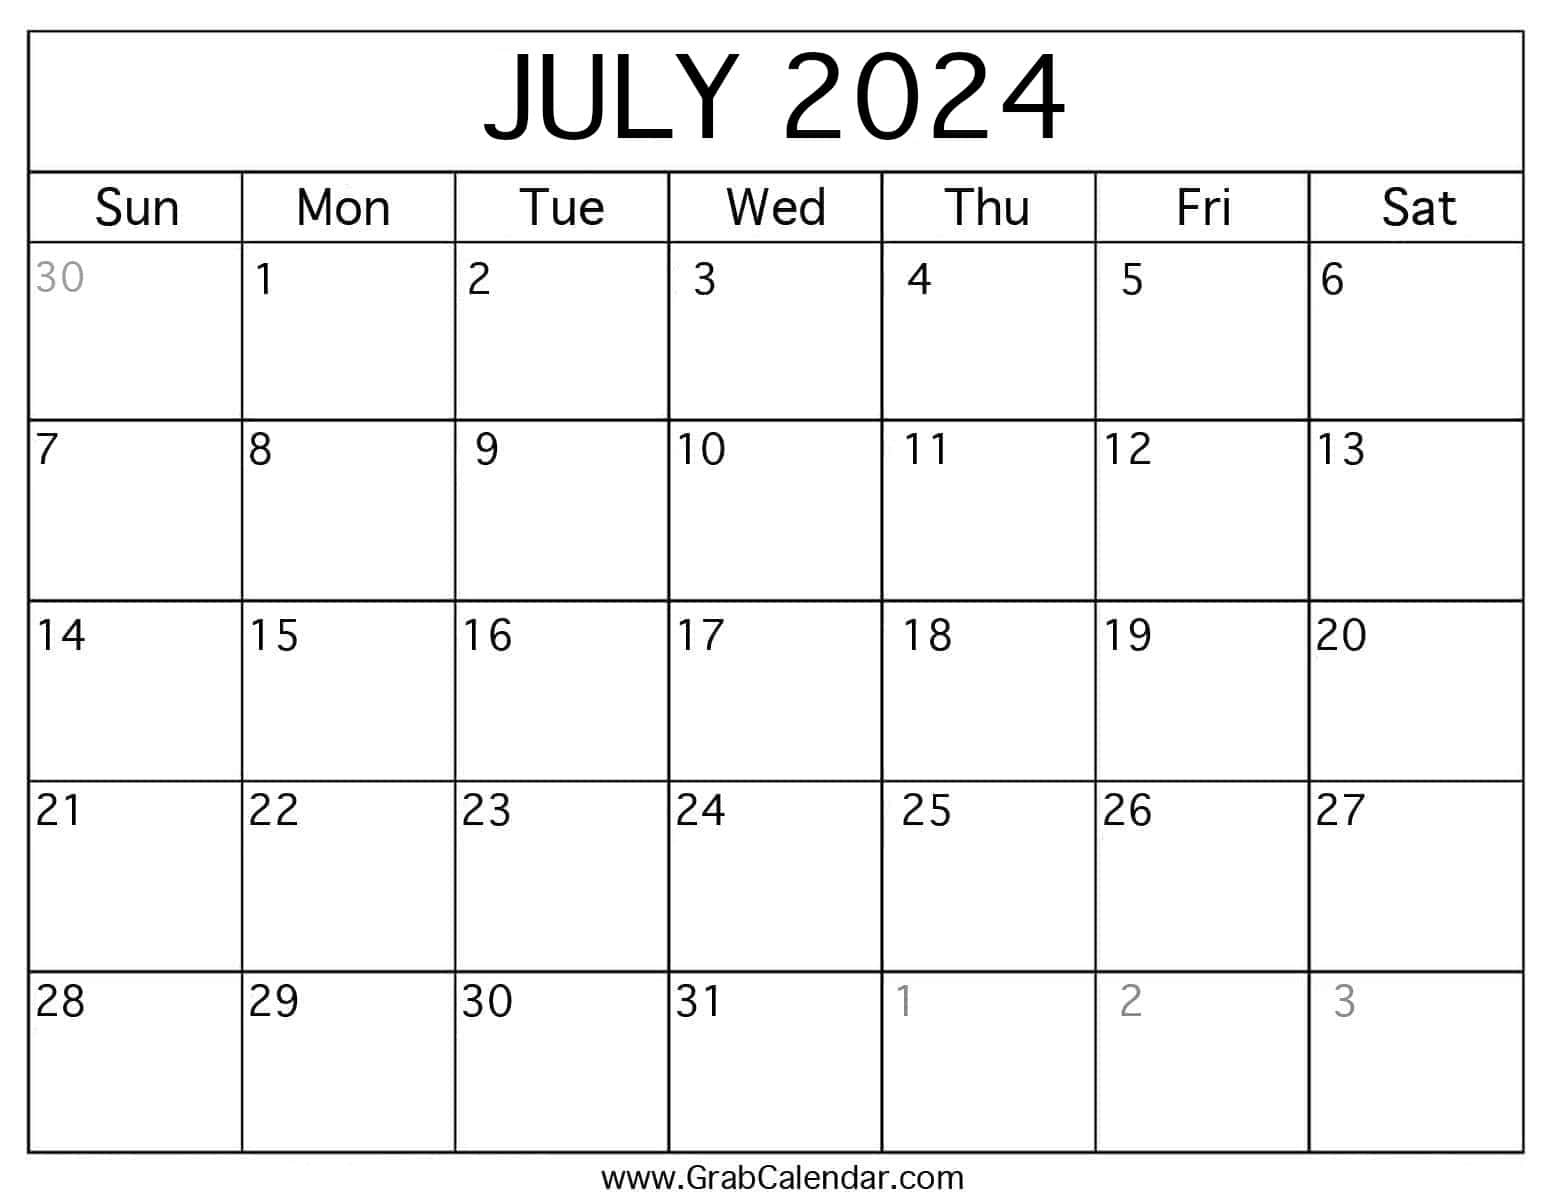 Printable July 2024 Calendar pertaining to Calendar July 2024 With Notes